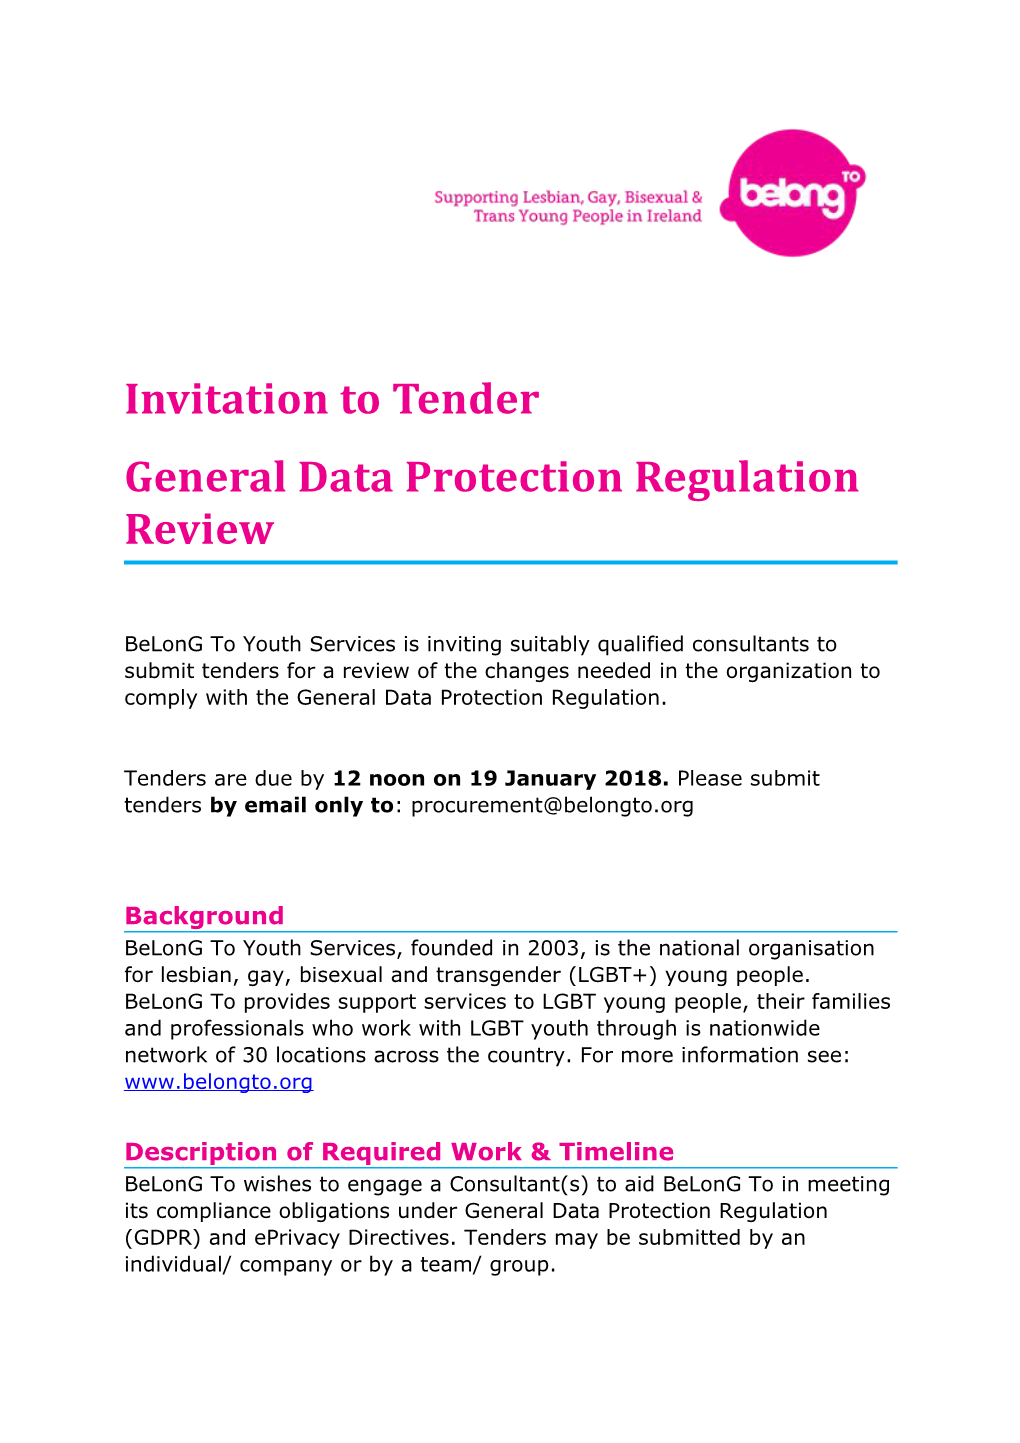 General Data Protection Regulation Review